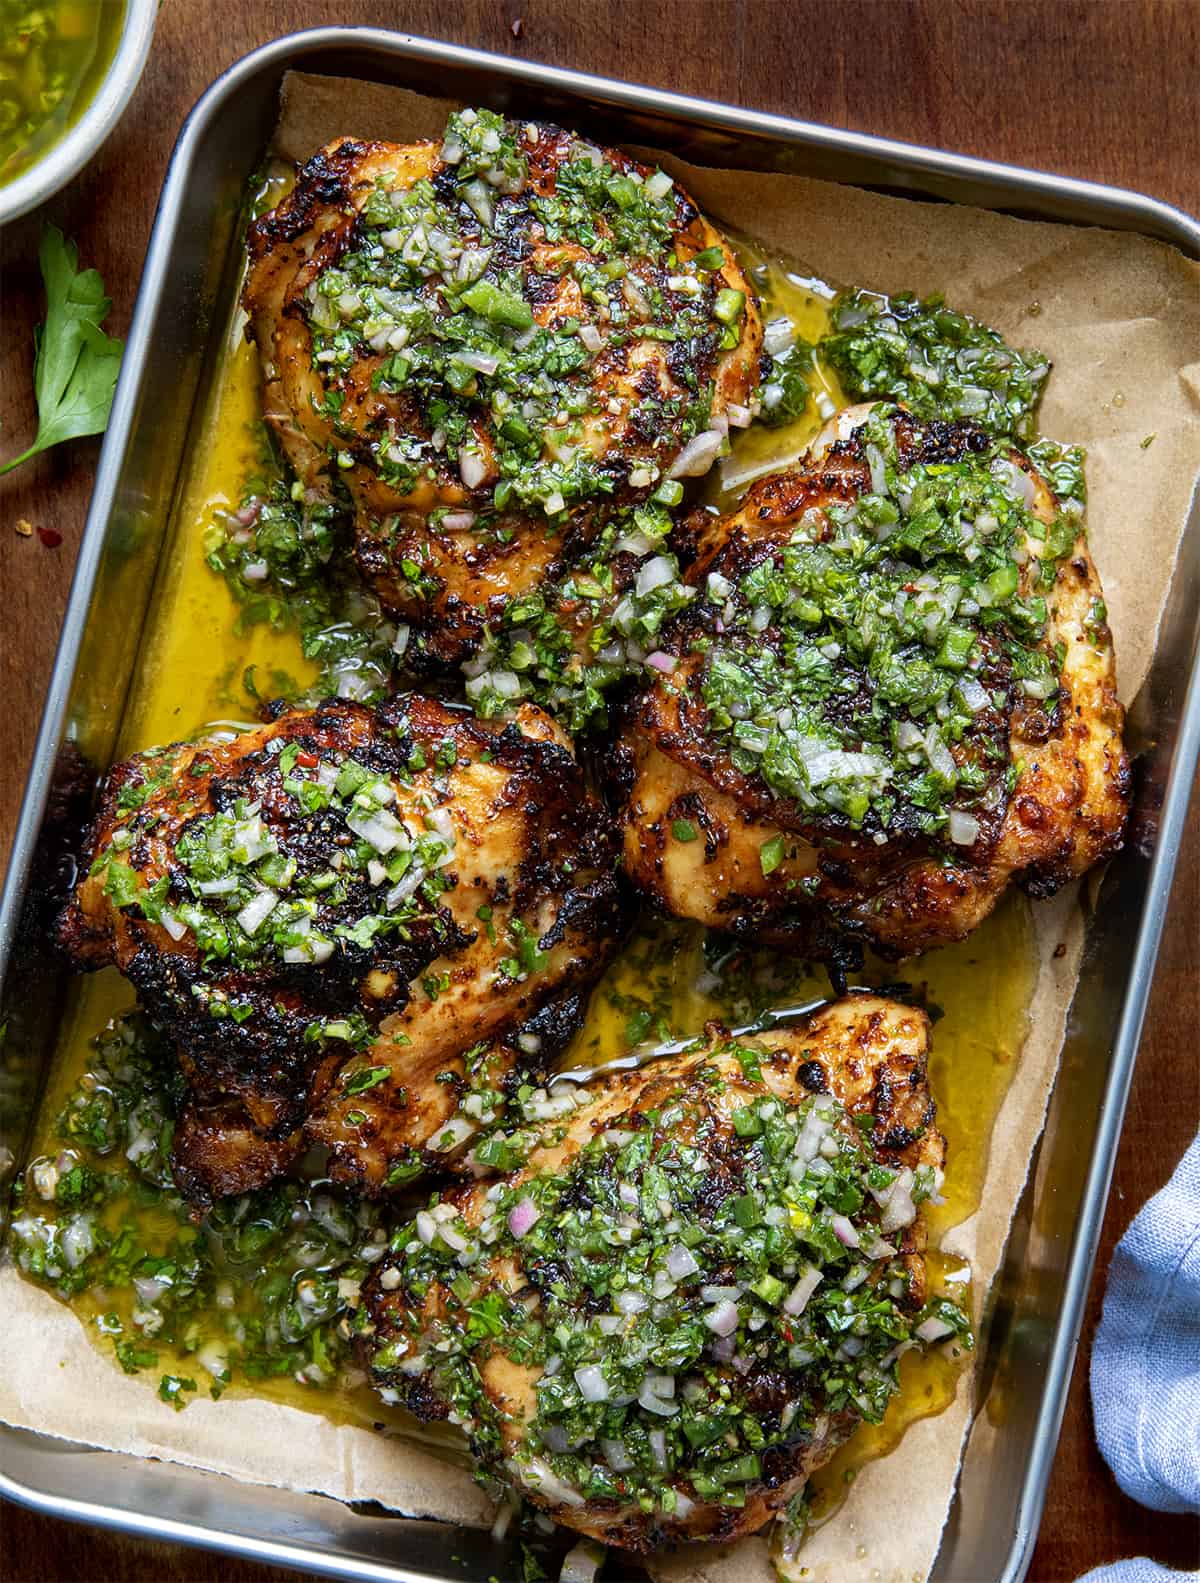 Tray of Chimichurri Chicken on a wooden table from overhead.